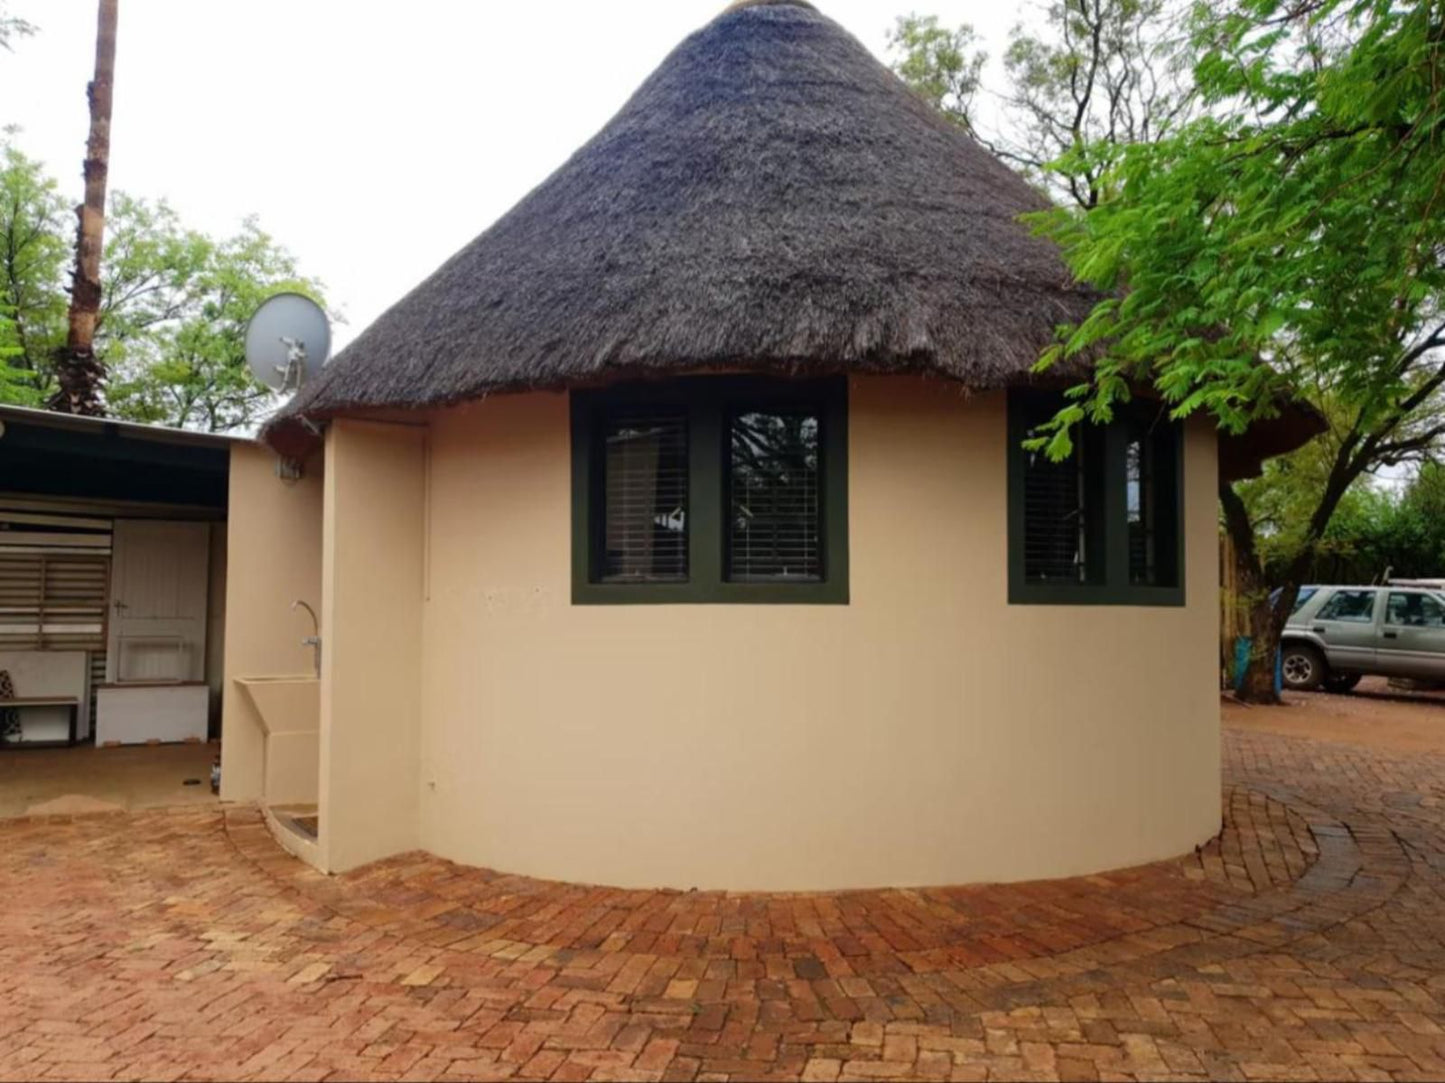 Honey Lodge Dinokeng Game Reserve Gauteng South Africa House, Building, Architecture